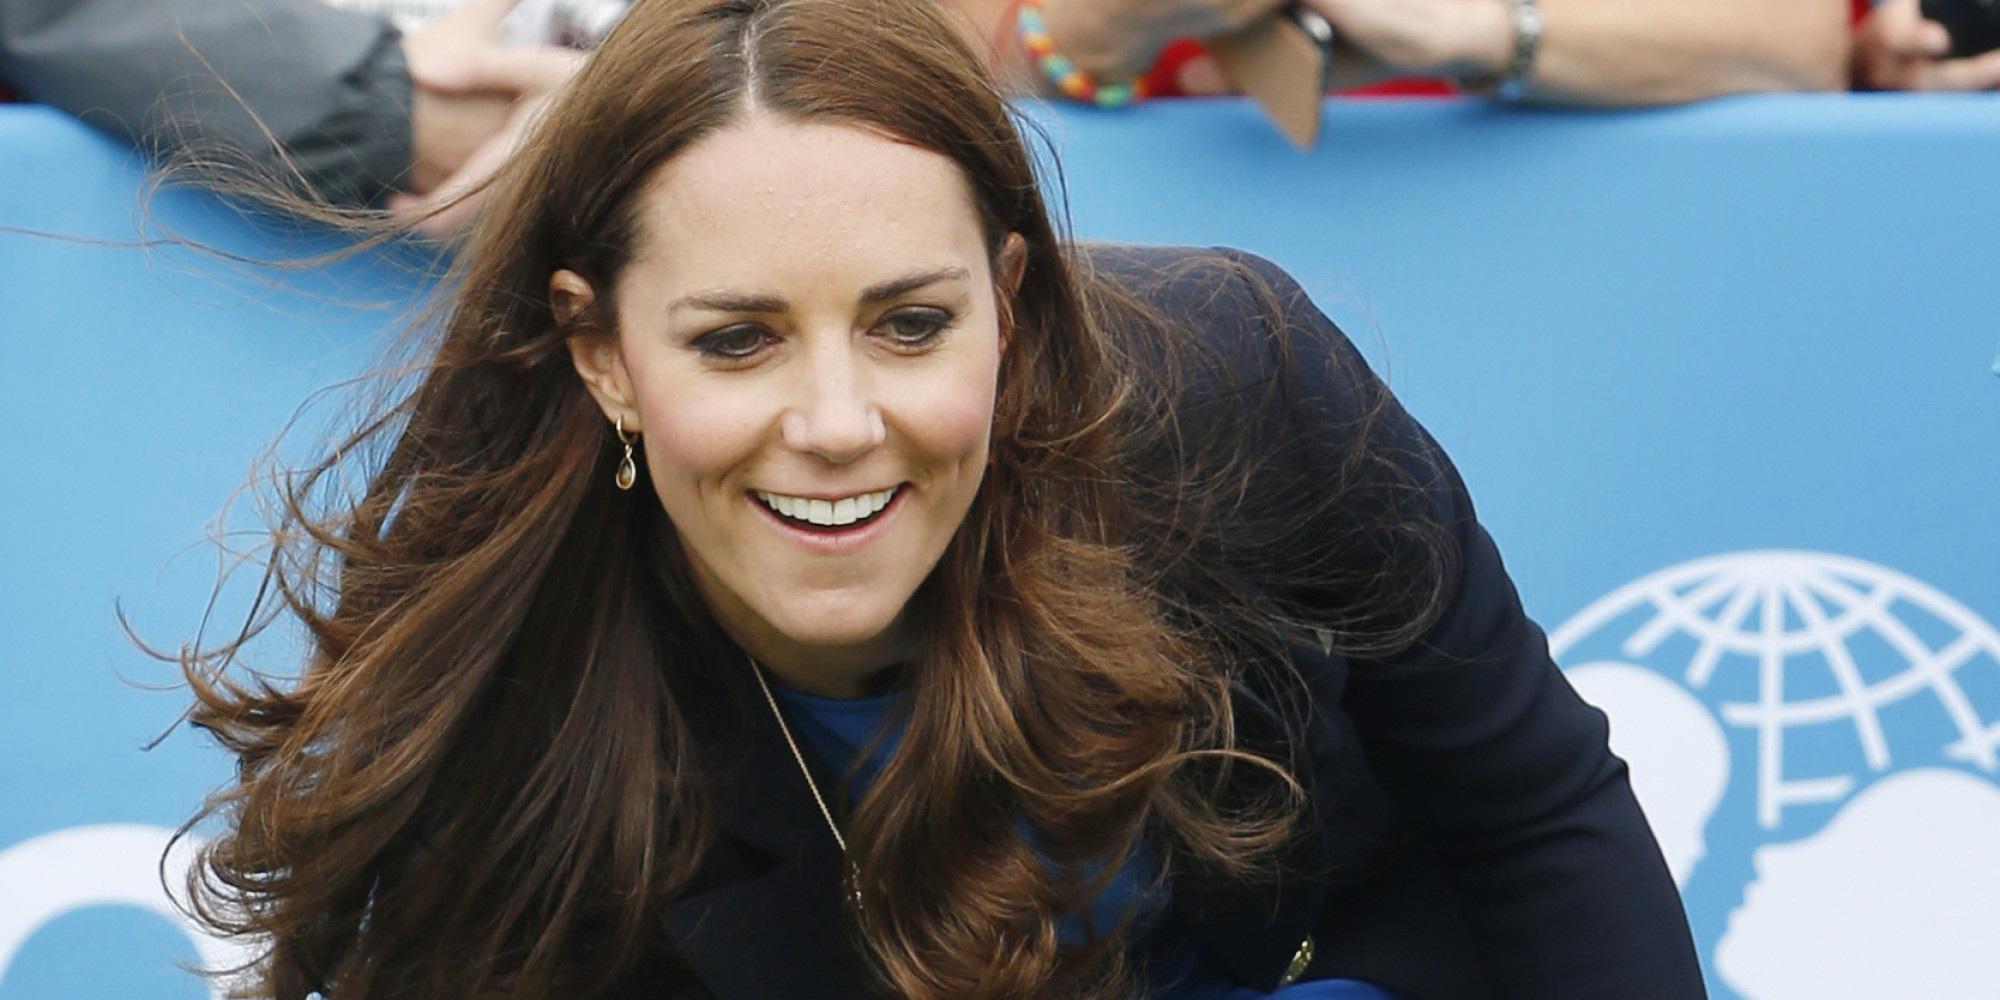 Kate Middleton Bowls In Gorgeous Blue Dress At Commonwealth Games (PHOTOS)